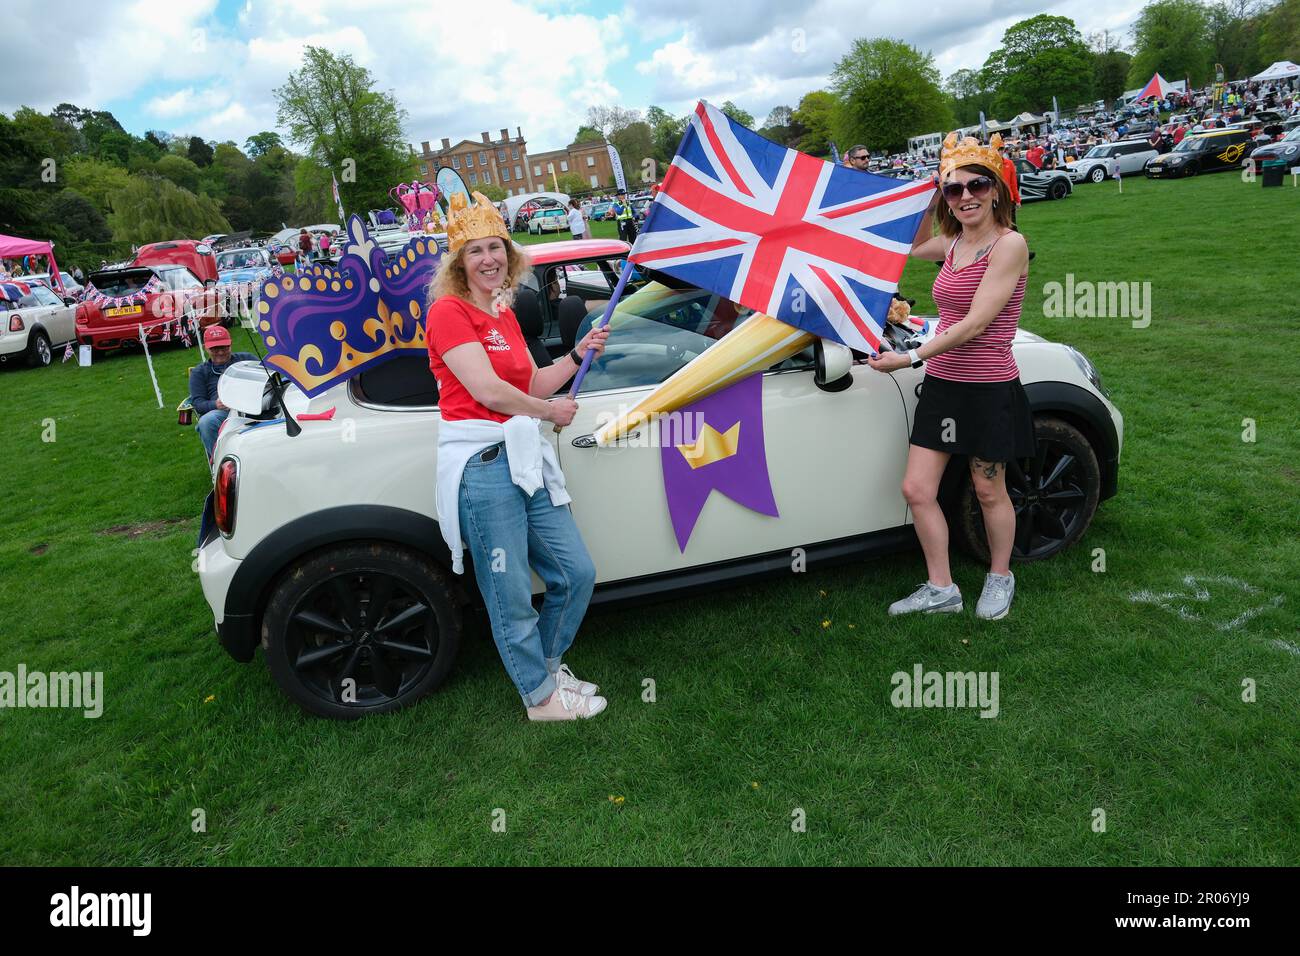 The British Mini Day was held at Himley Hall Nr Dudley, West Midlands, to celebrate the iconic Mini from 1959 to present day. This years show also saw the clib celebrate the Kings Coronation with patriotic themes and displays of Mini”s  past and present. There was also a Royal Mini Picnic in the Park.  Lr Caroline Curry & Francoise Lucas from the Mini Girls UK Club   The venue, Himley Hall & Park is an 18th Century building set amongst 180 acres of ‘Capability Brown’ landscaped parkland. For over four centuries it served as home to the Lords of Dudley and their knights. On Sunday 7th May was t Stock Photo